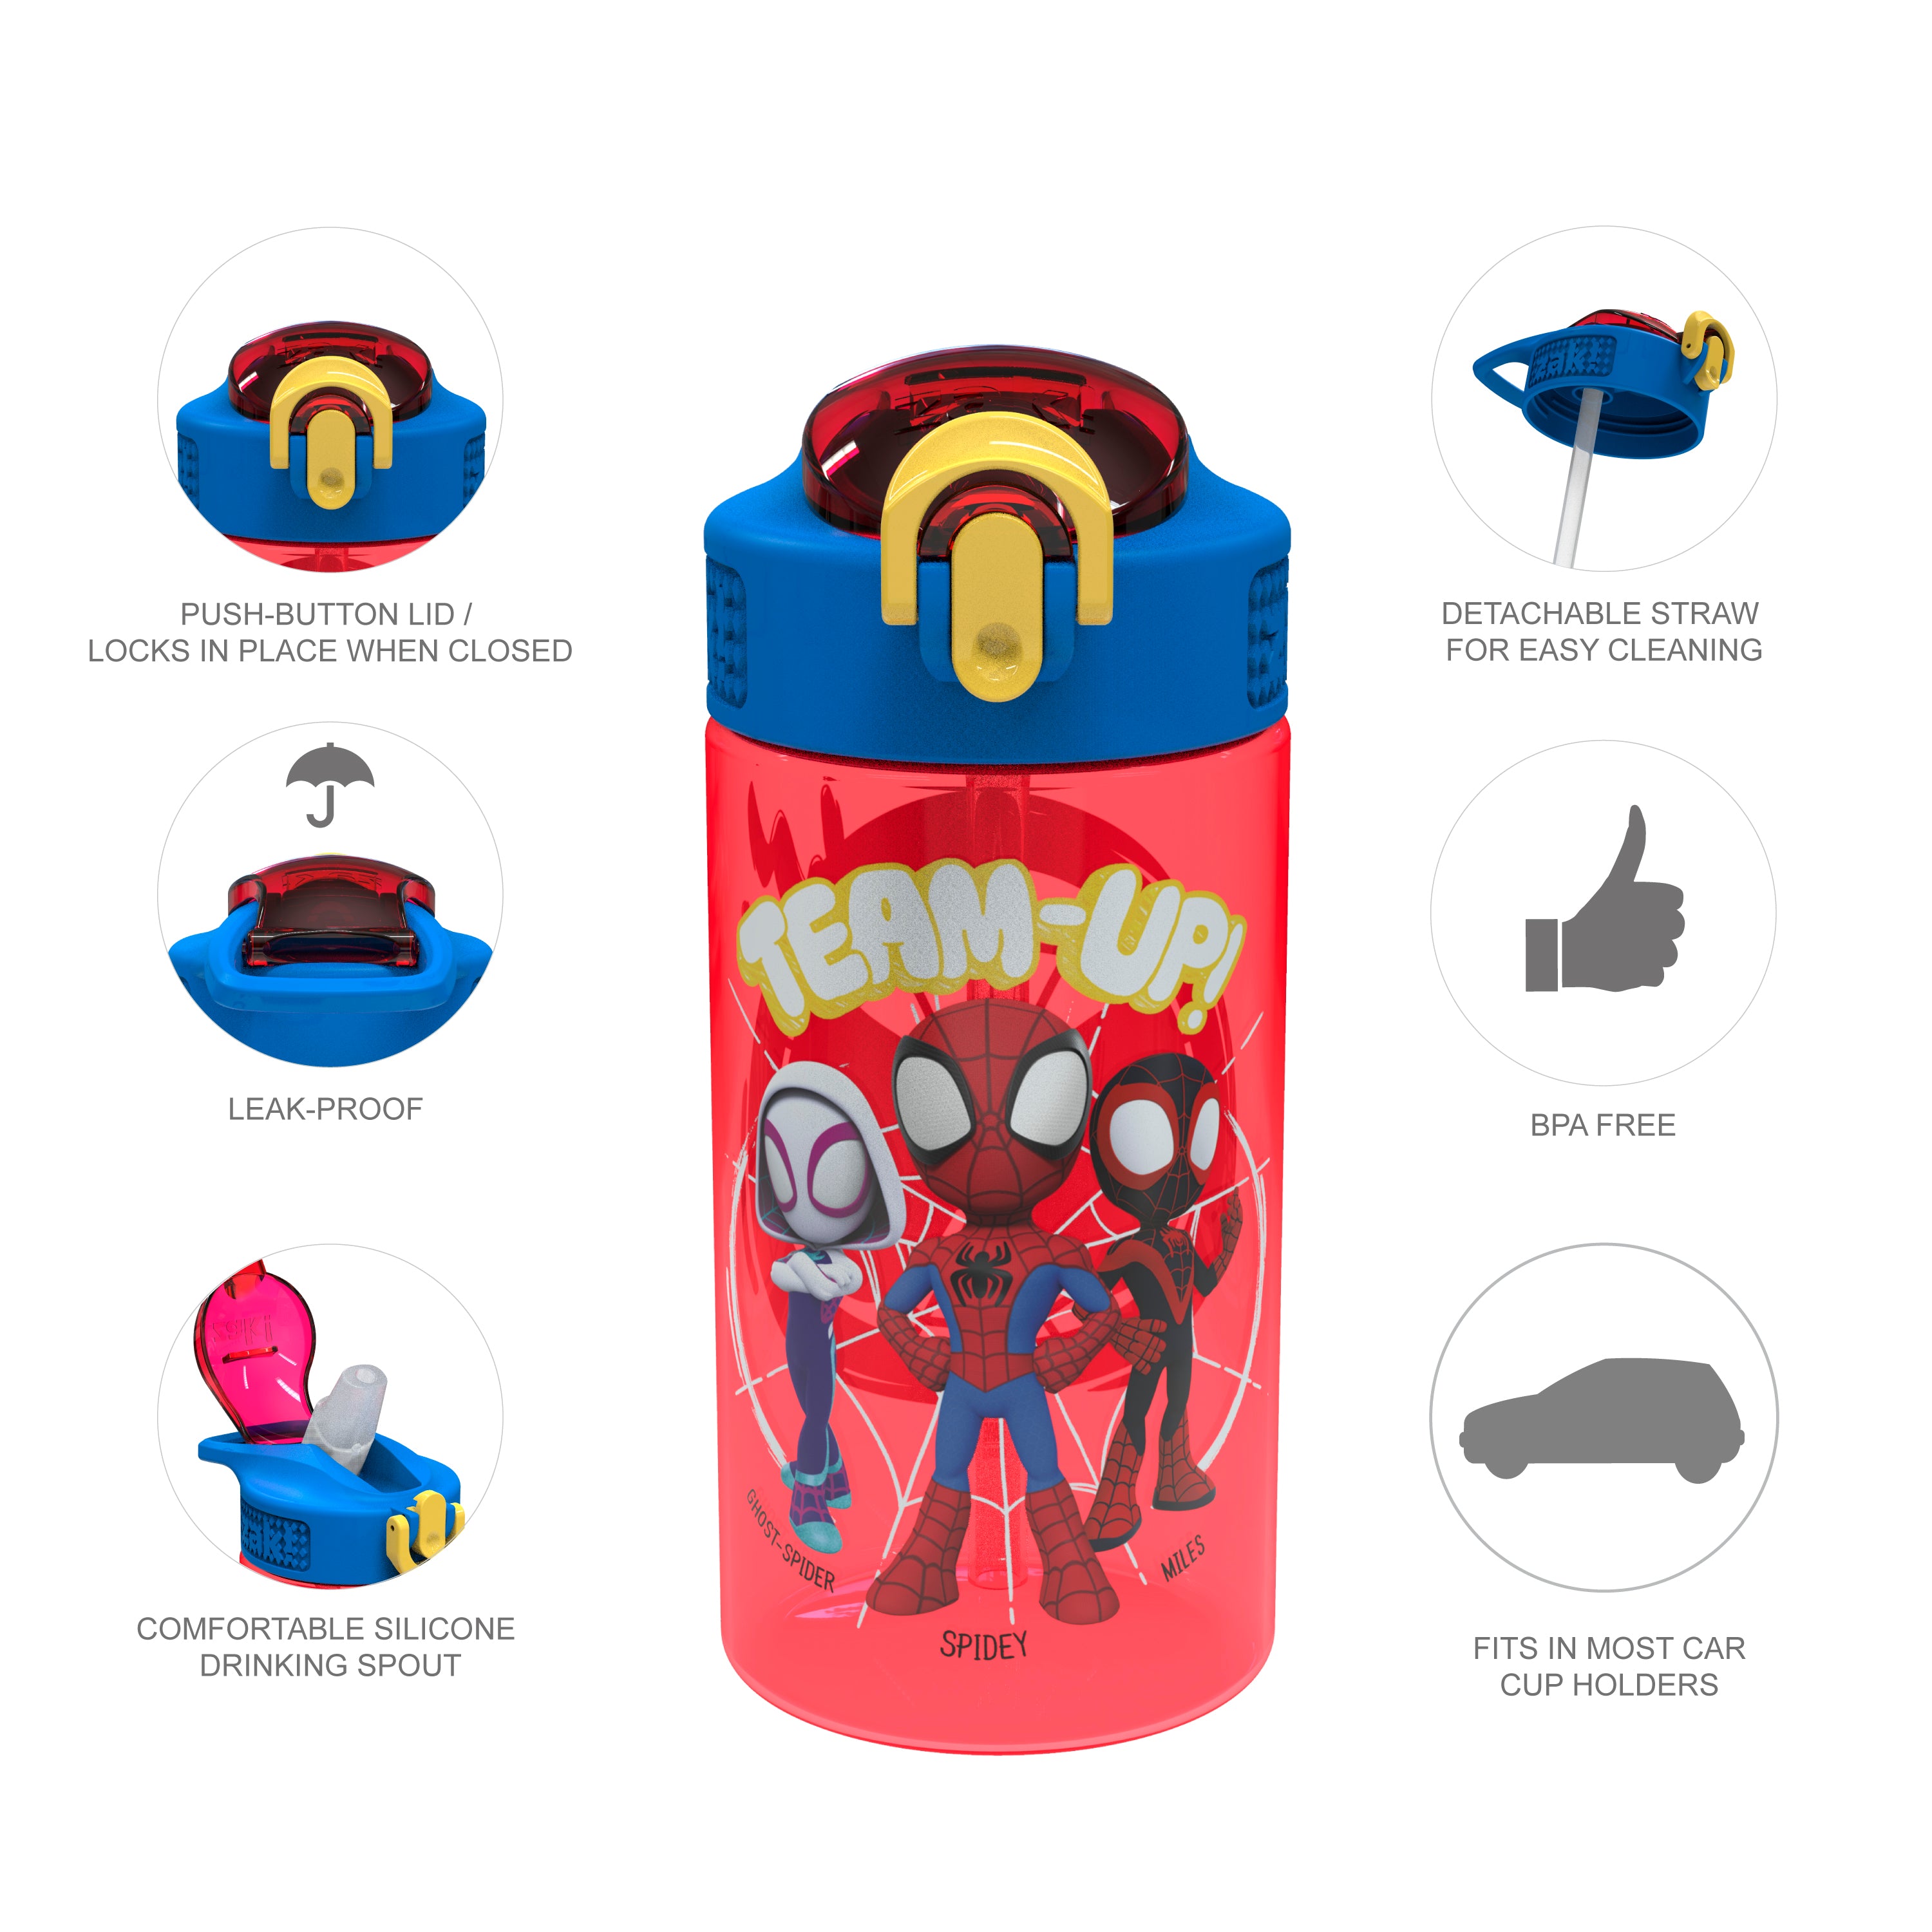 Zak Designs Spidey & Friends 16oz Water Bottle - Cool Kids Red Pull-Top  Bottle with Marvel Spider-Ma…See more Zak Designs Spidey & Friends 16oz  Water